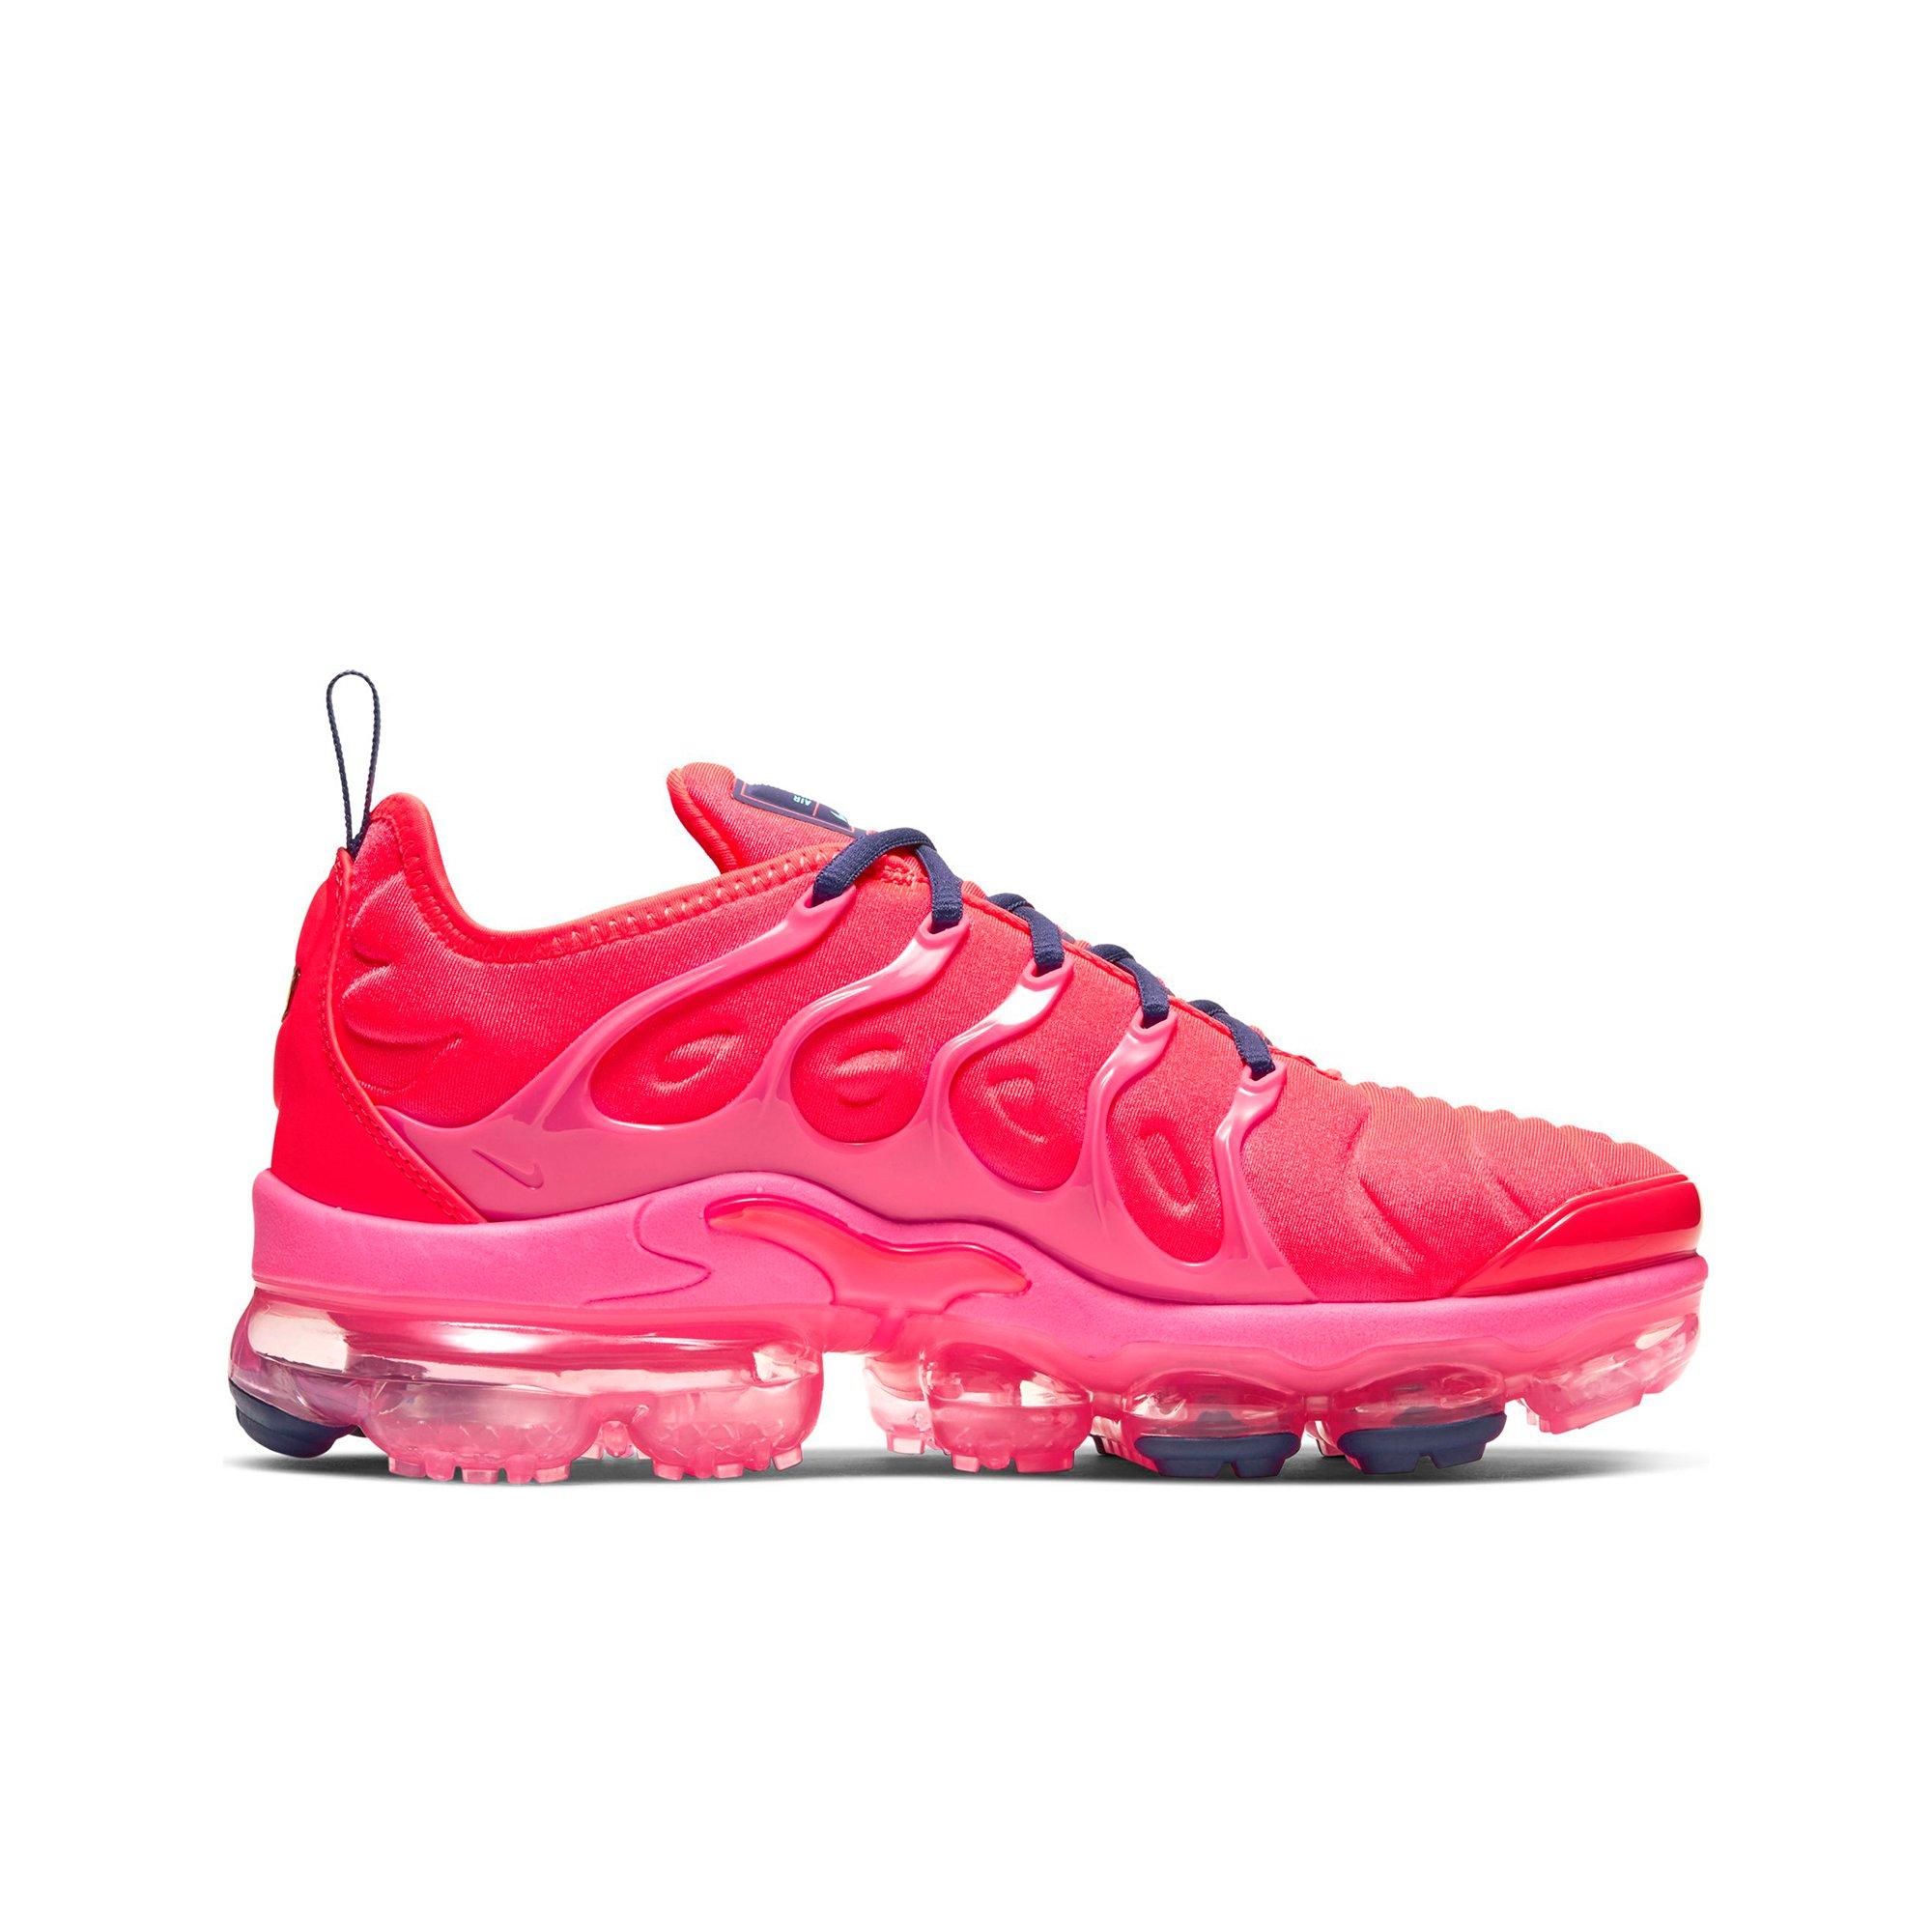 vapormax plus purple and pink